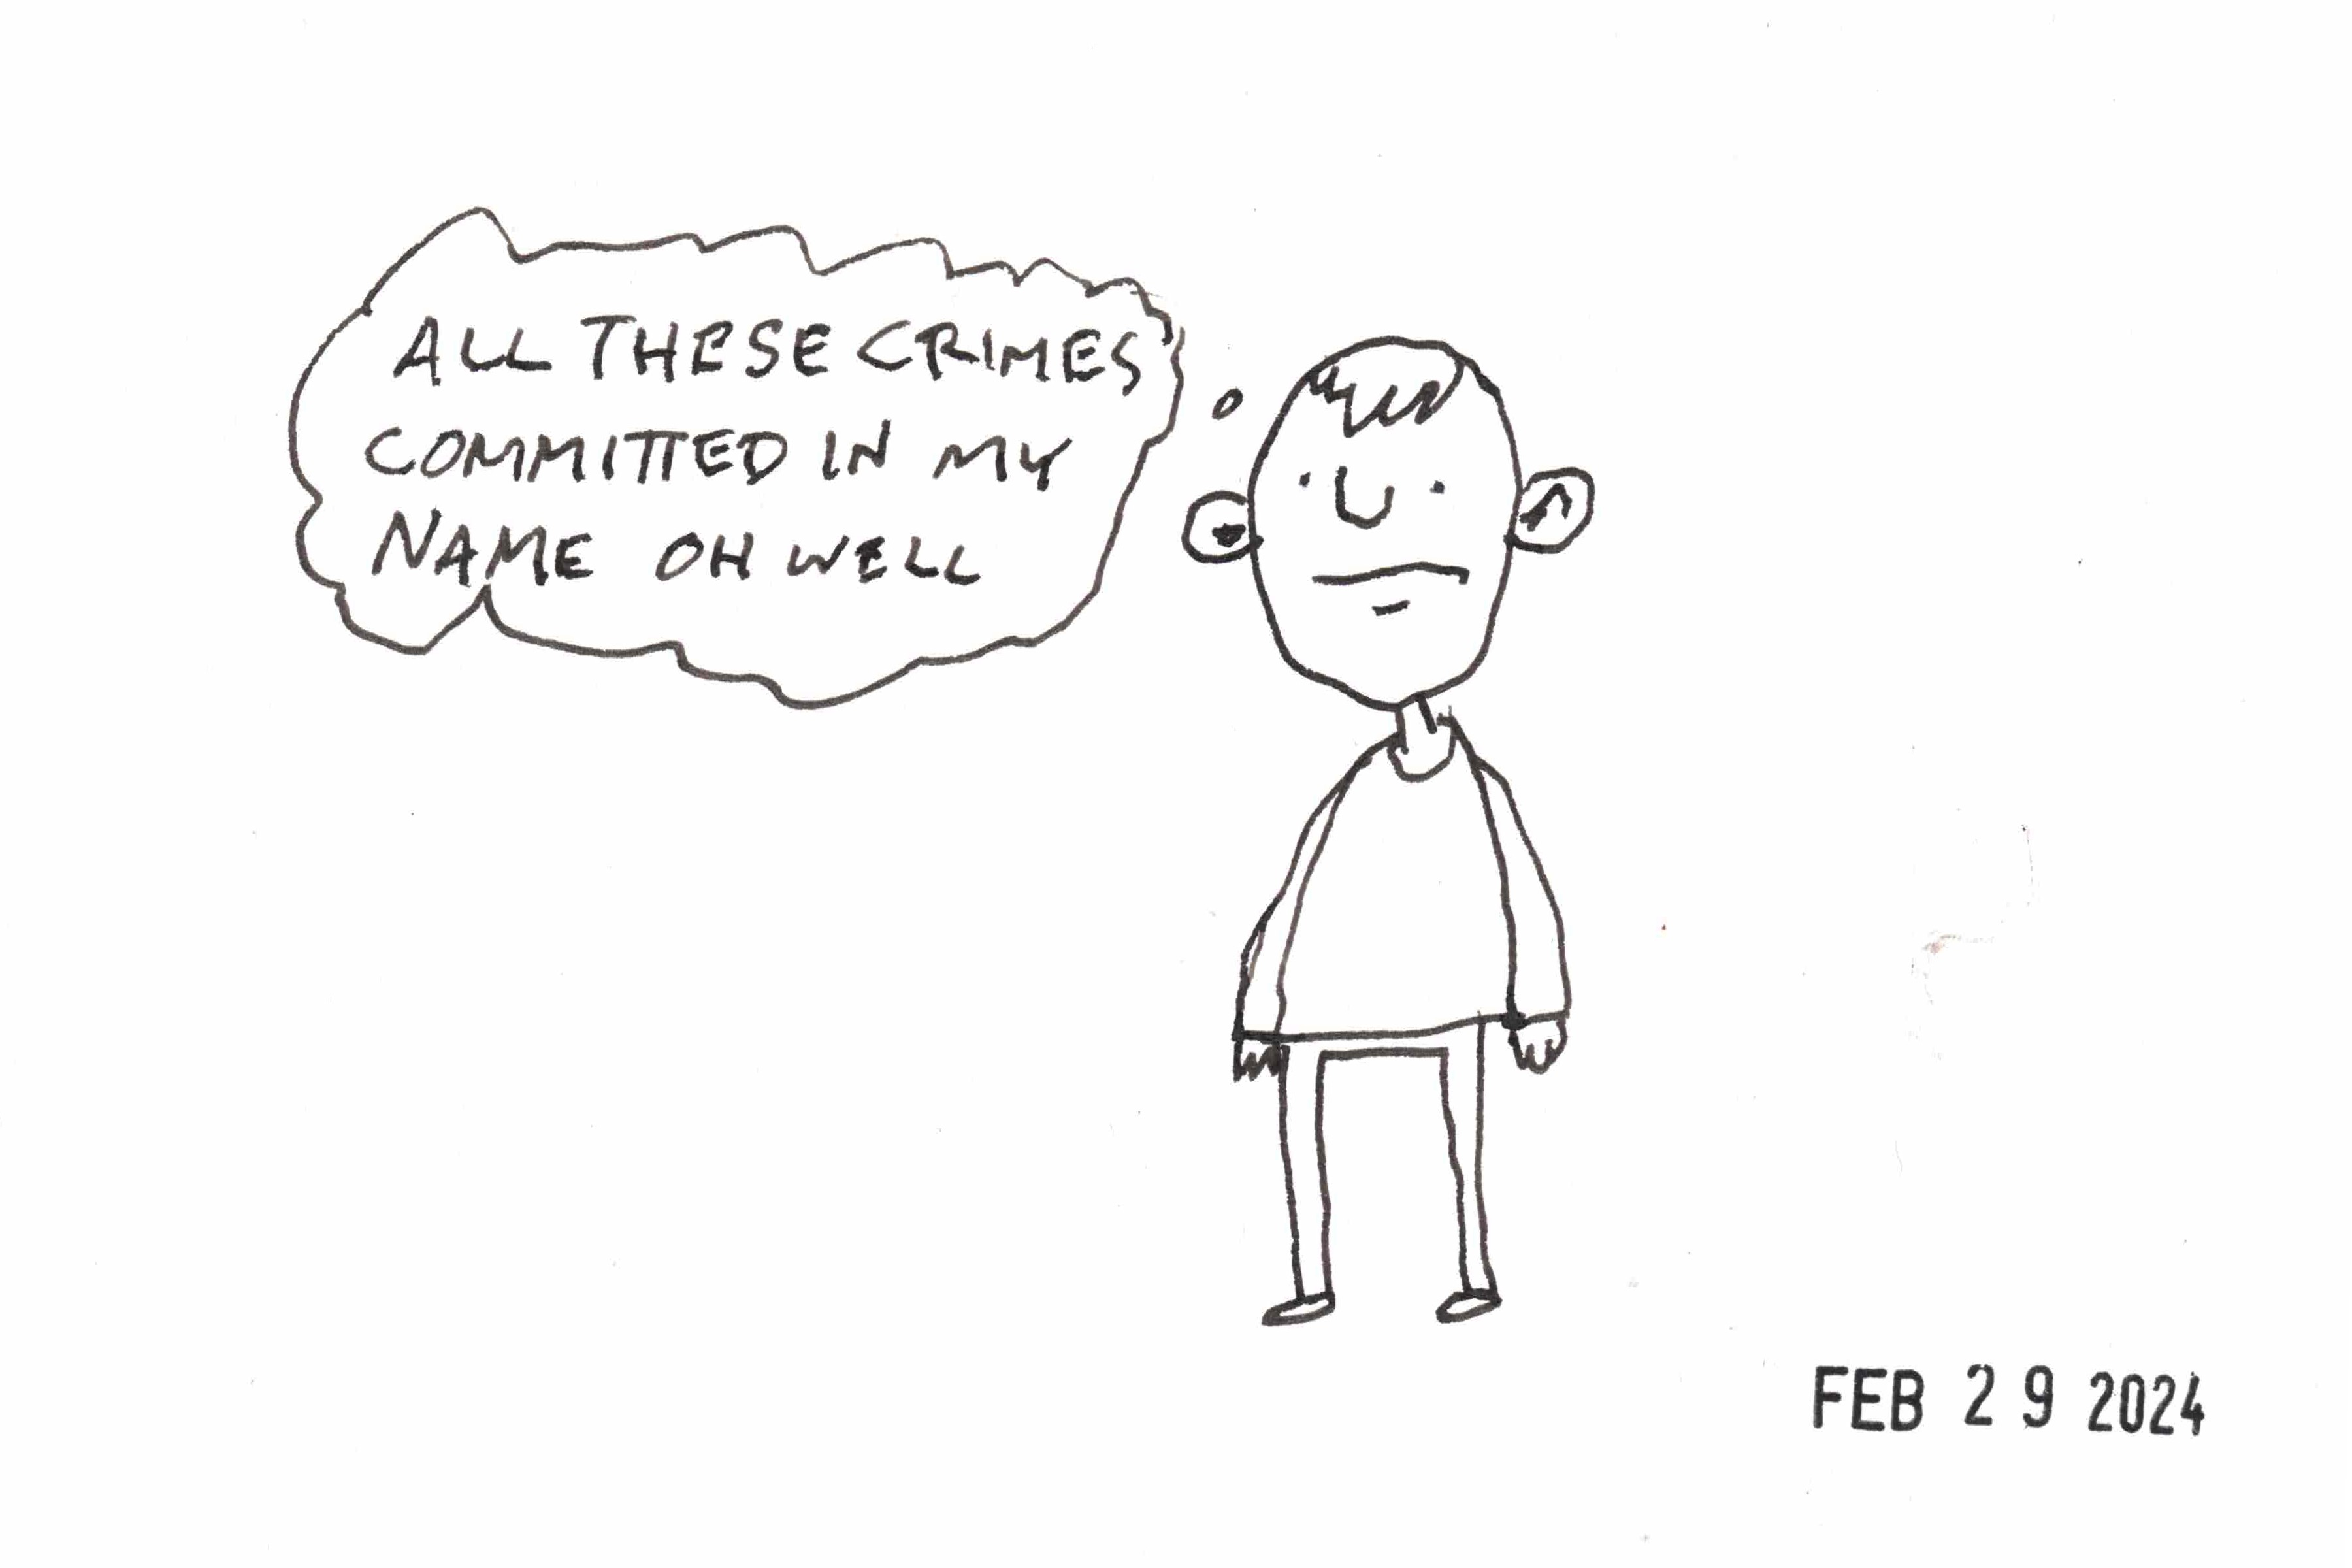 cartoon of sad man bemoaning crimes committed in his name